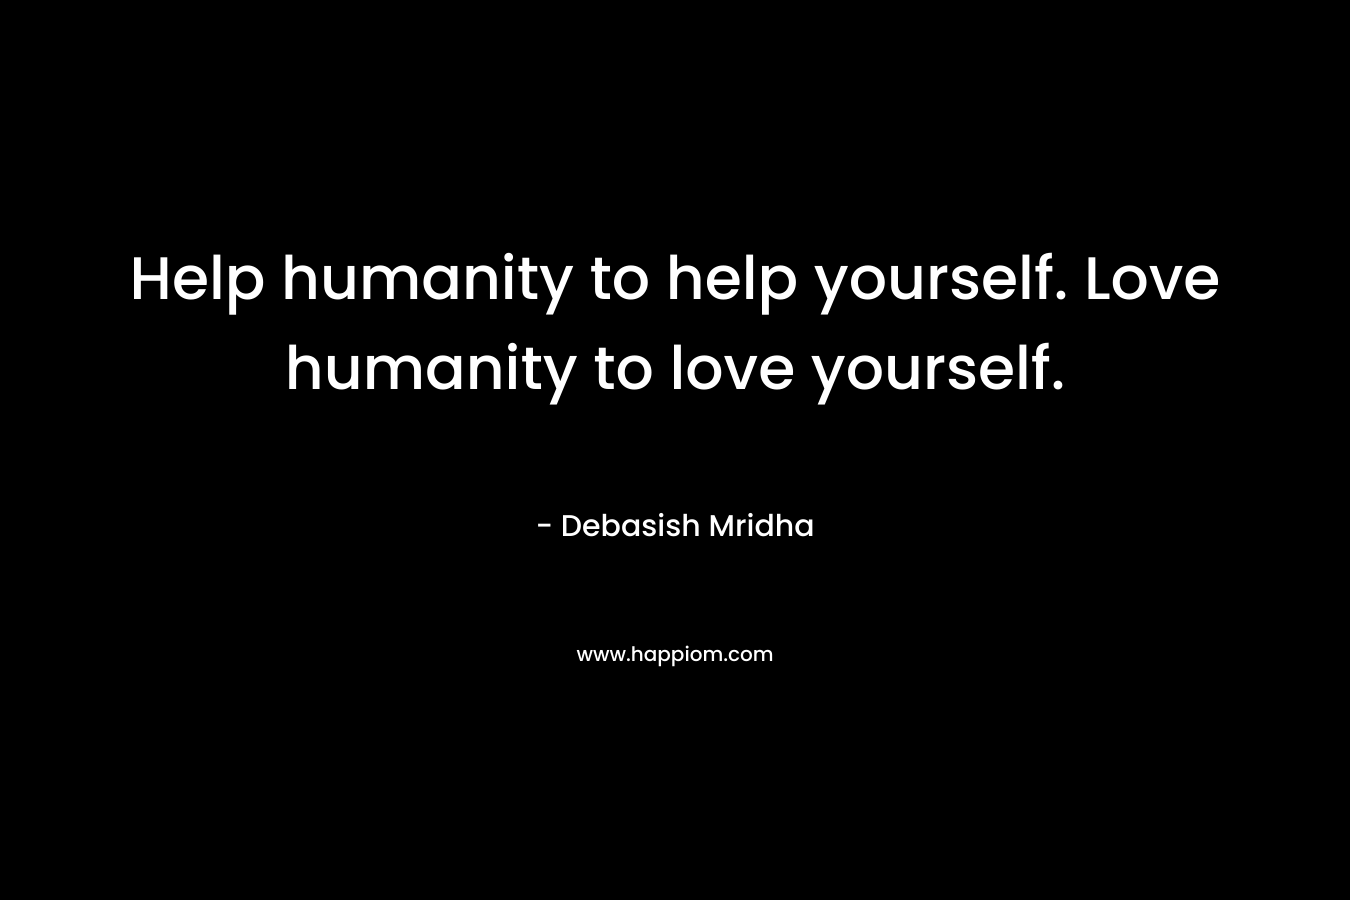 Help humanity to help yourself. Love humanity to love yourself.